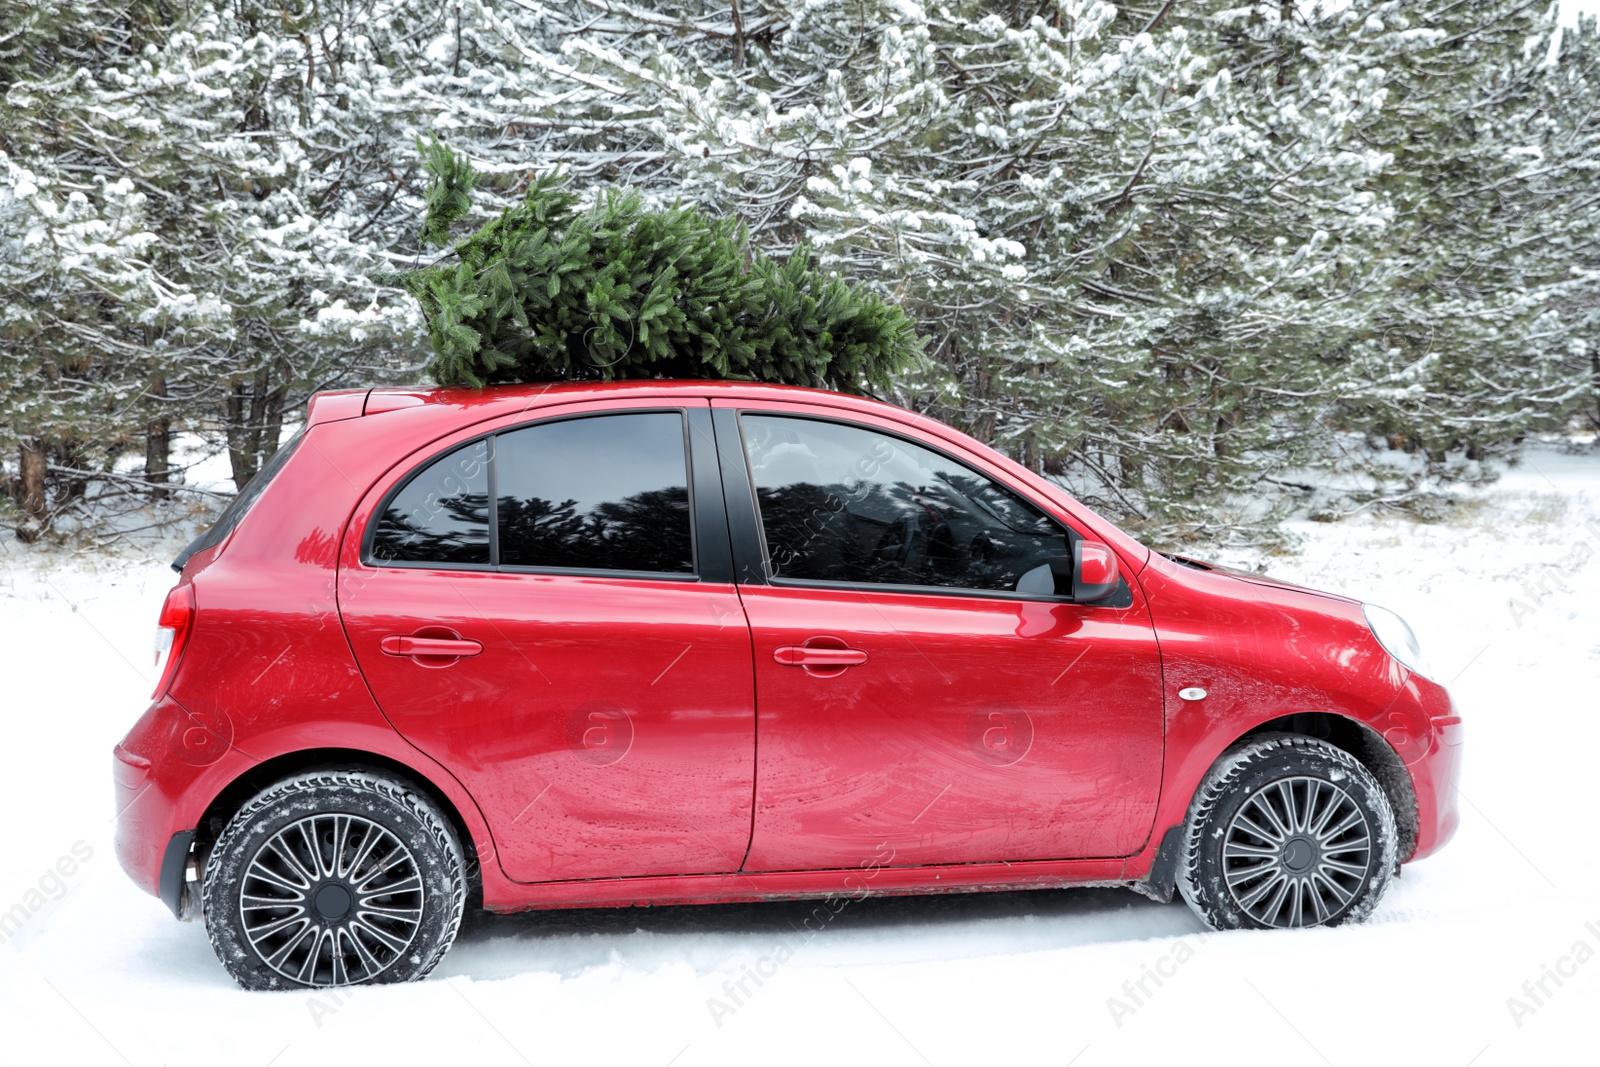 Photo of Car with fir tree on roof in snowy winter forest